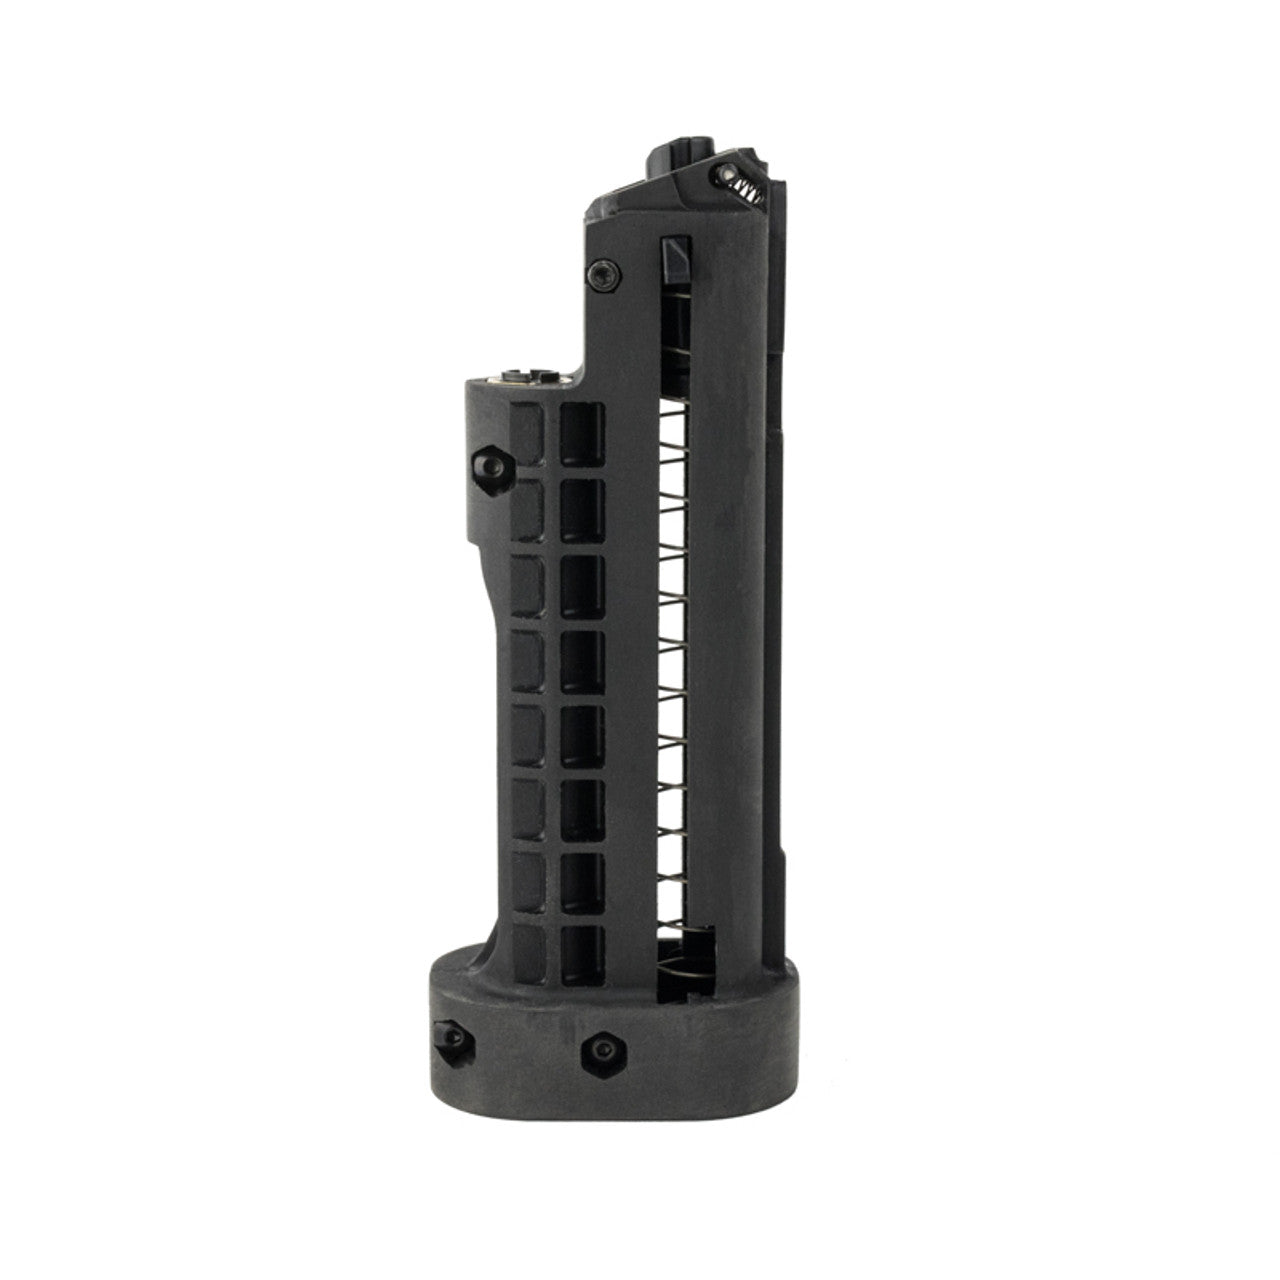 FIRST STRIKE COMPACT PISTOL (FSC) MAGS - Eminent Paintball And Airsoft